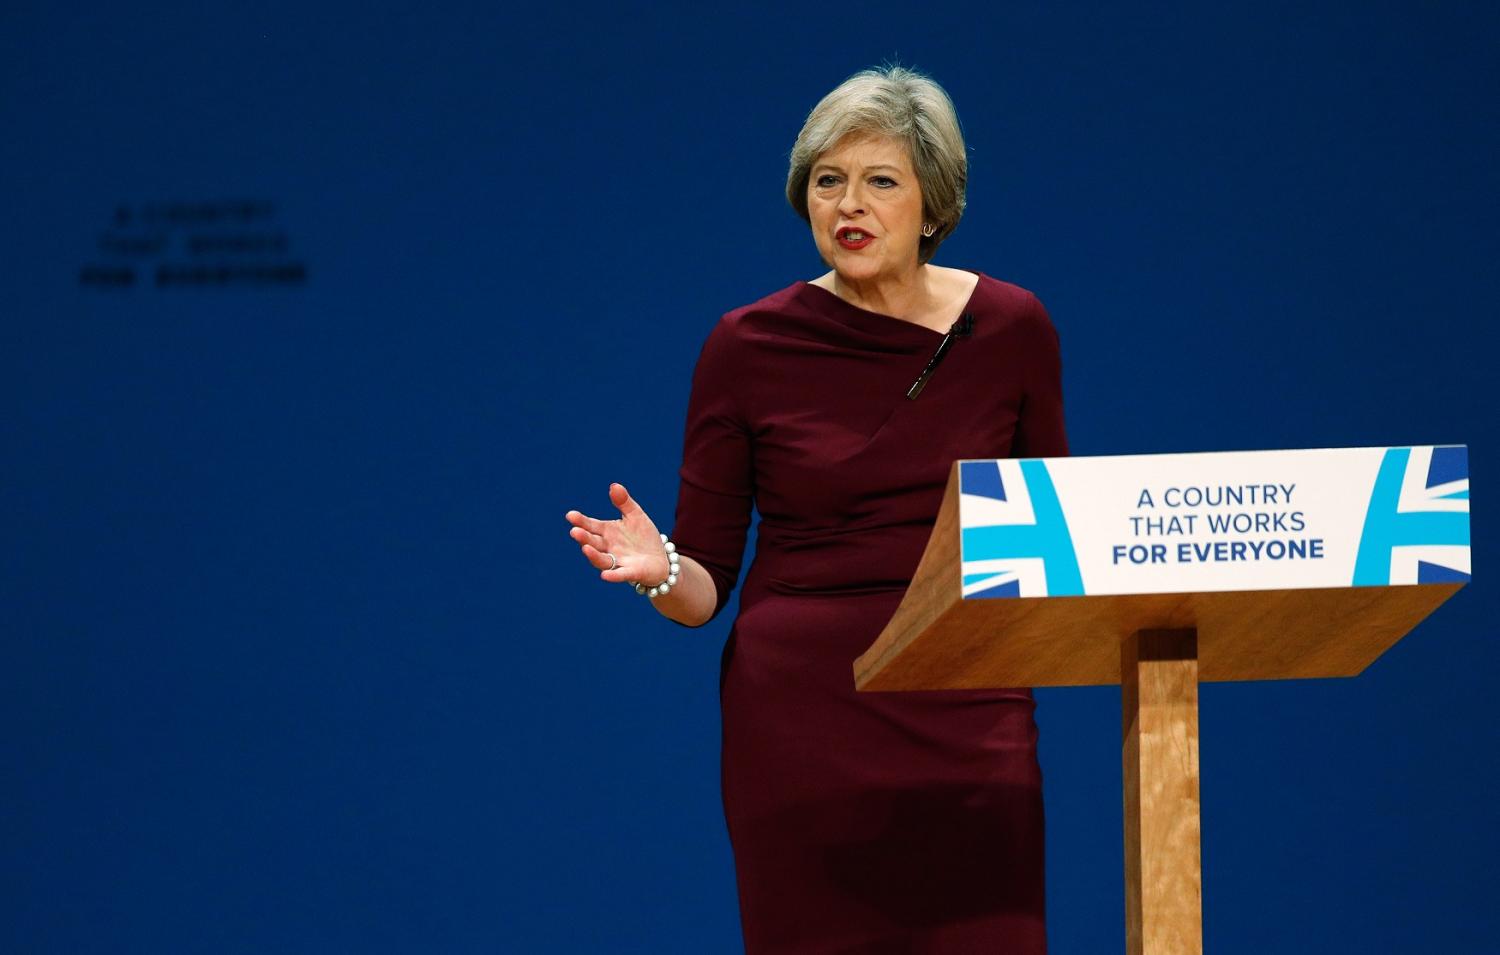 Theresa May gestures with one hand at the podium.